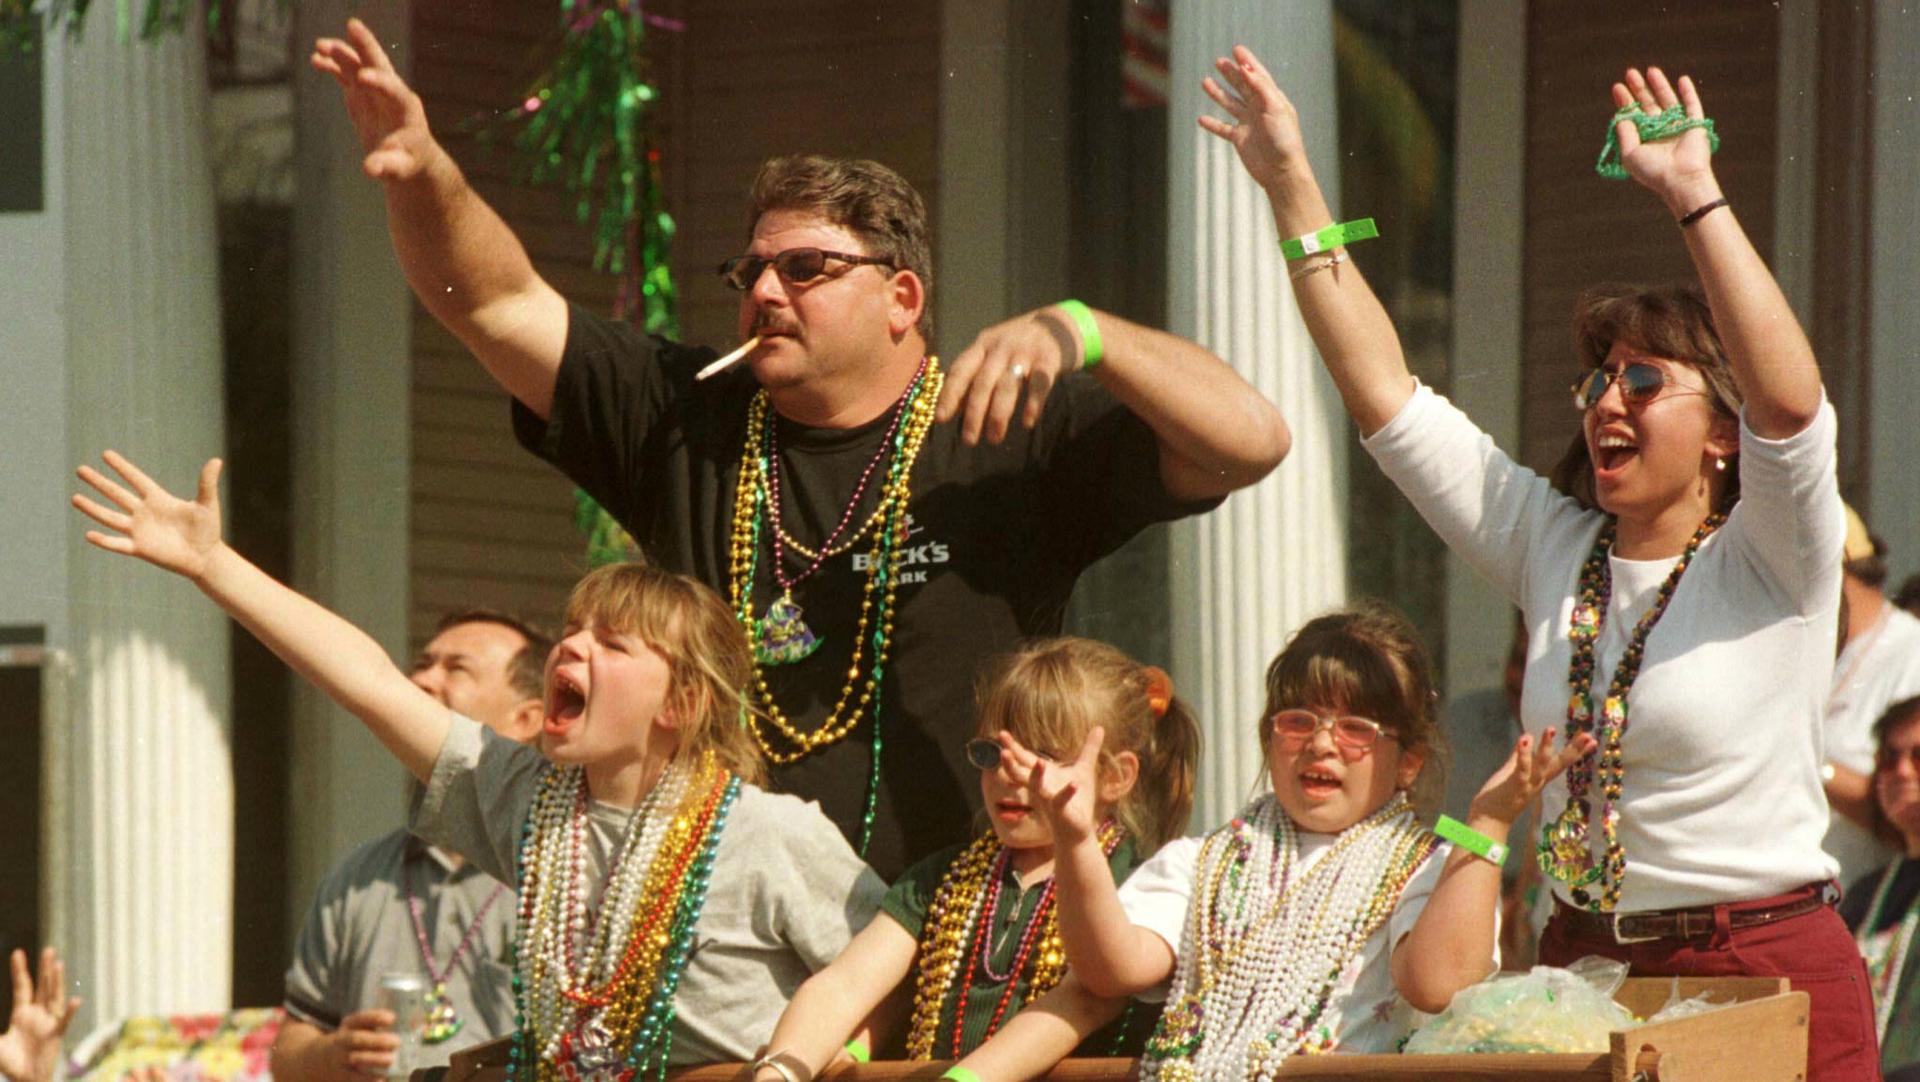 Revelers catch Mardi Gras beads during the Krewe of Thoth parade down St. Charles Avenue in New Orleans, March 5, 2000.